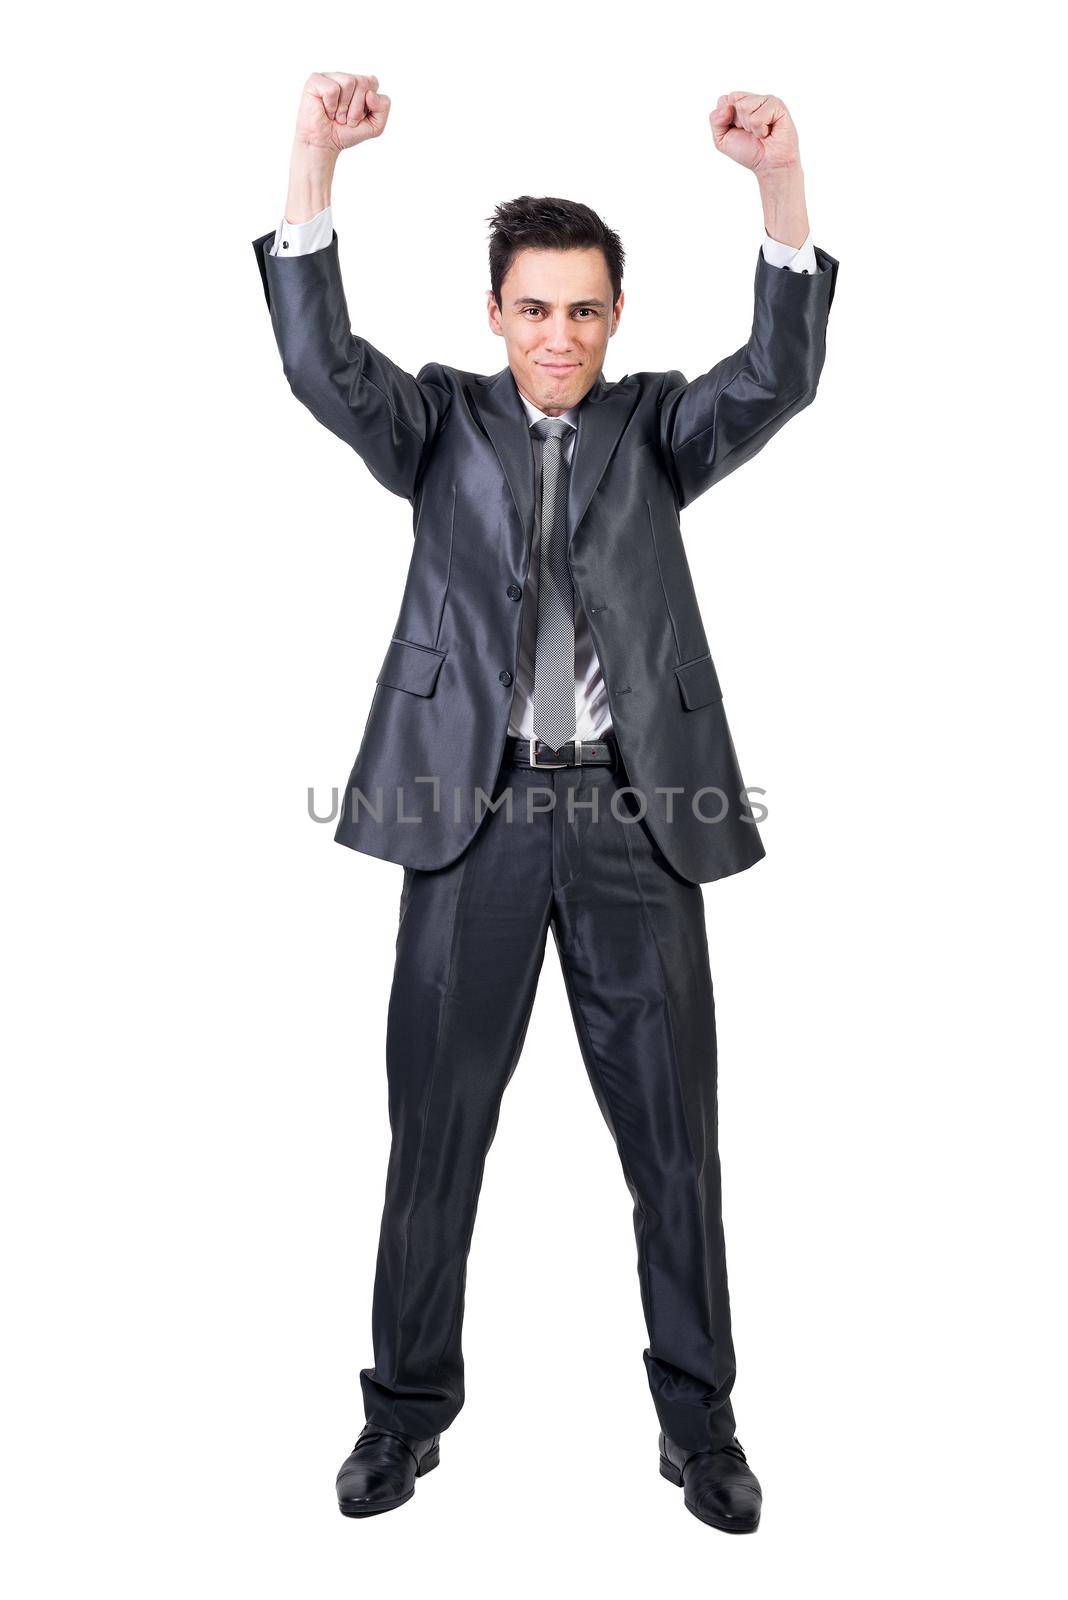 Full body of positive male in formal suit raising clenched fists and looking at camera while celebrating victory isolated on white background in studio